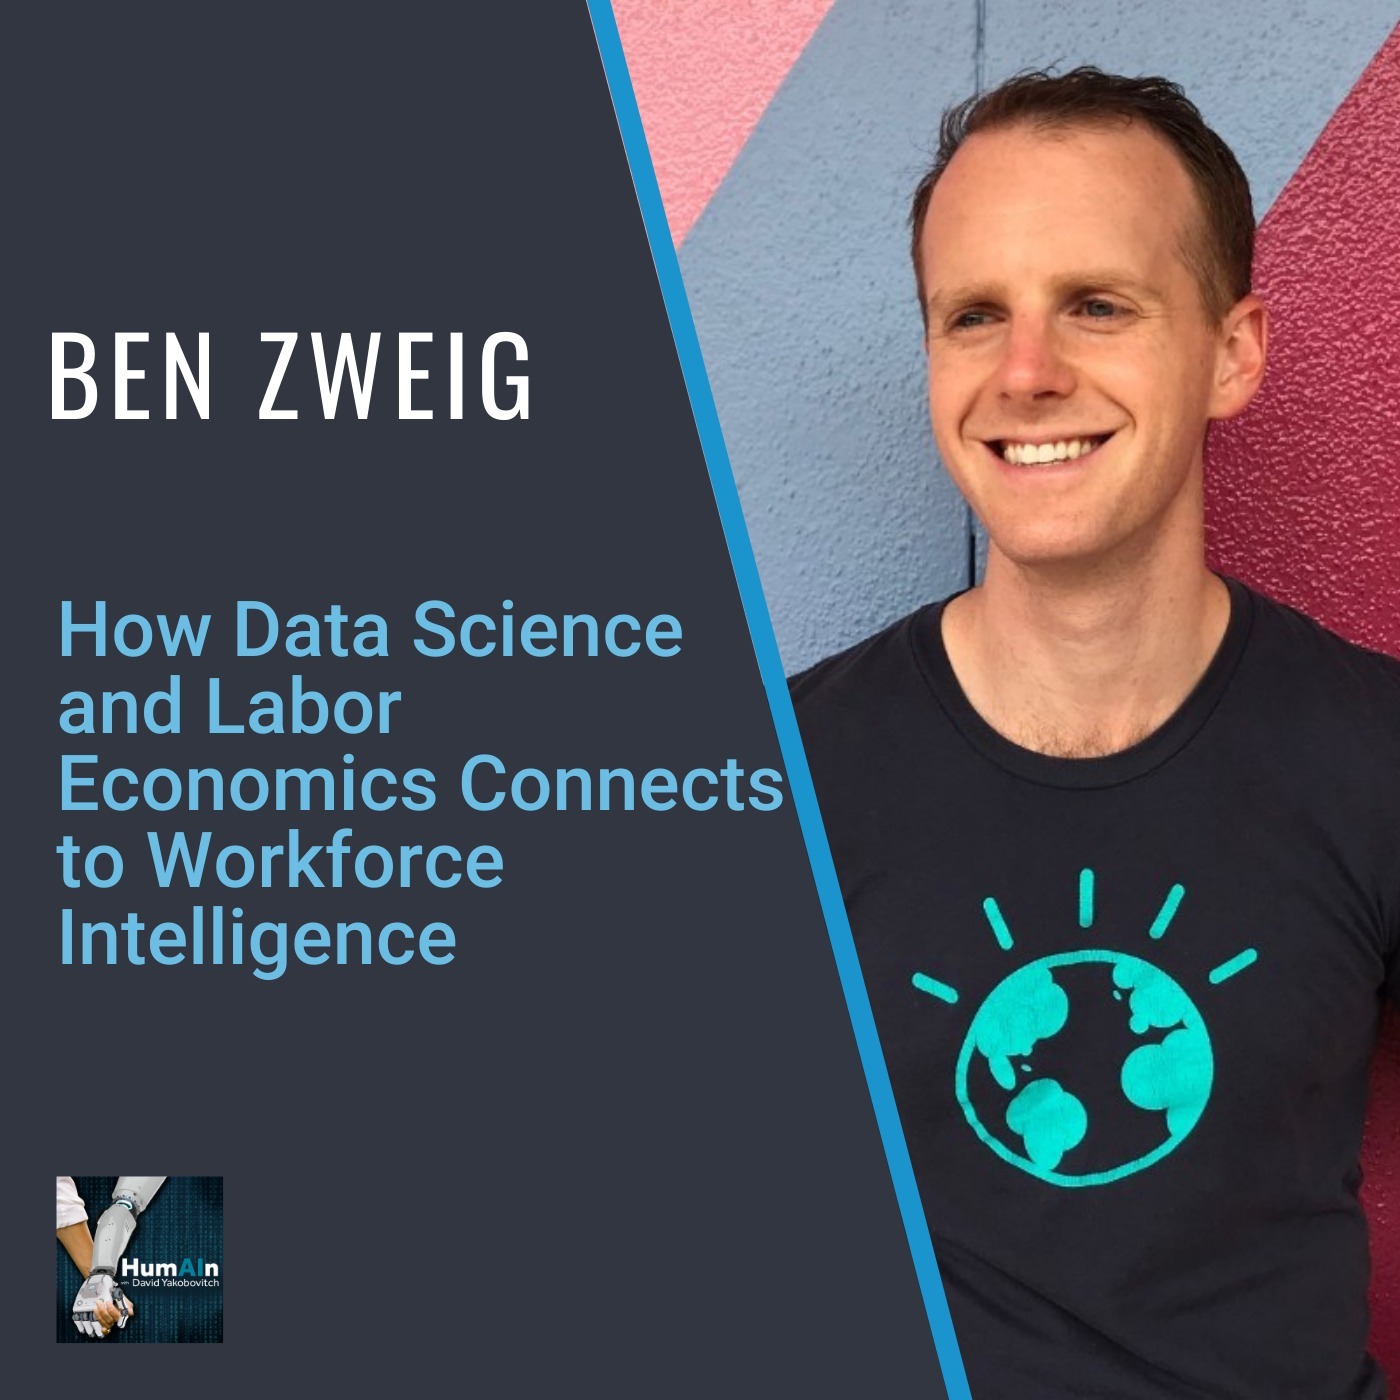 Ben Zweig: How Data Science and Labor Economics Connects to Workforce Intelligence